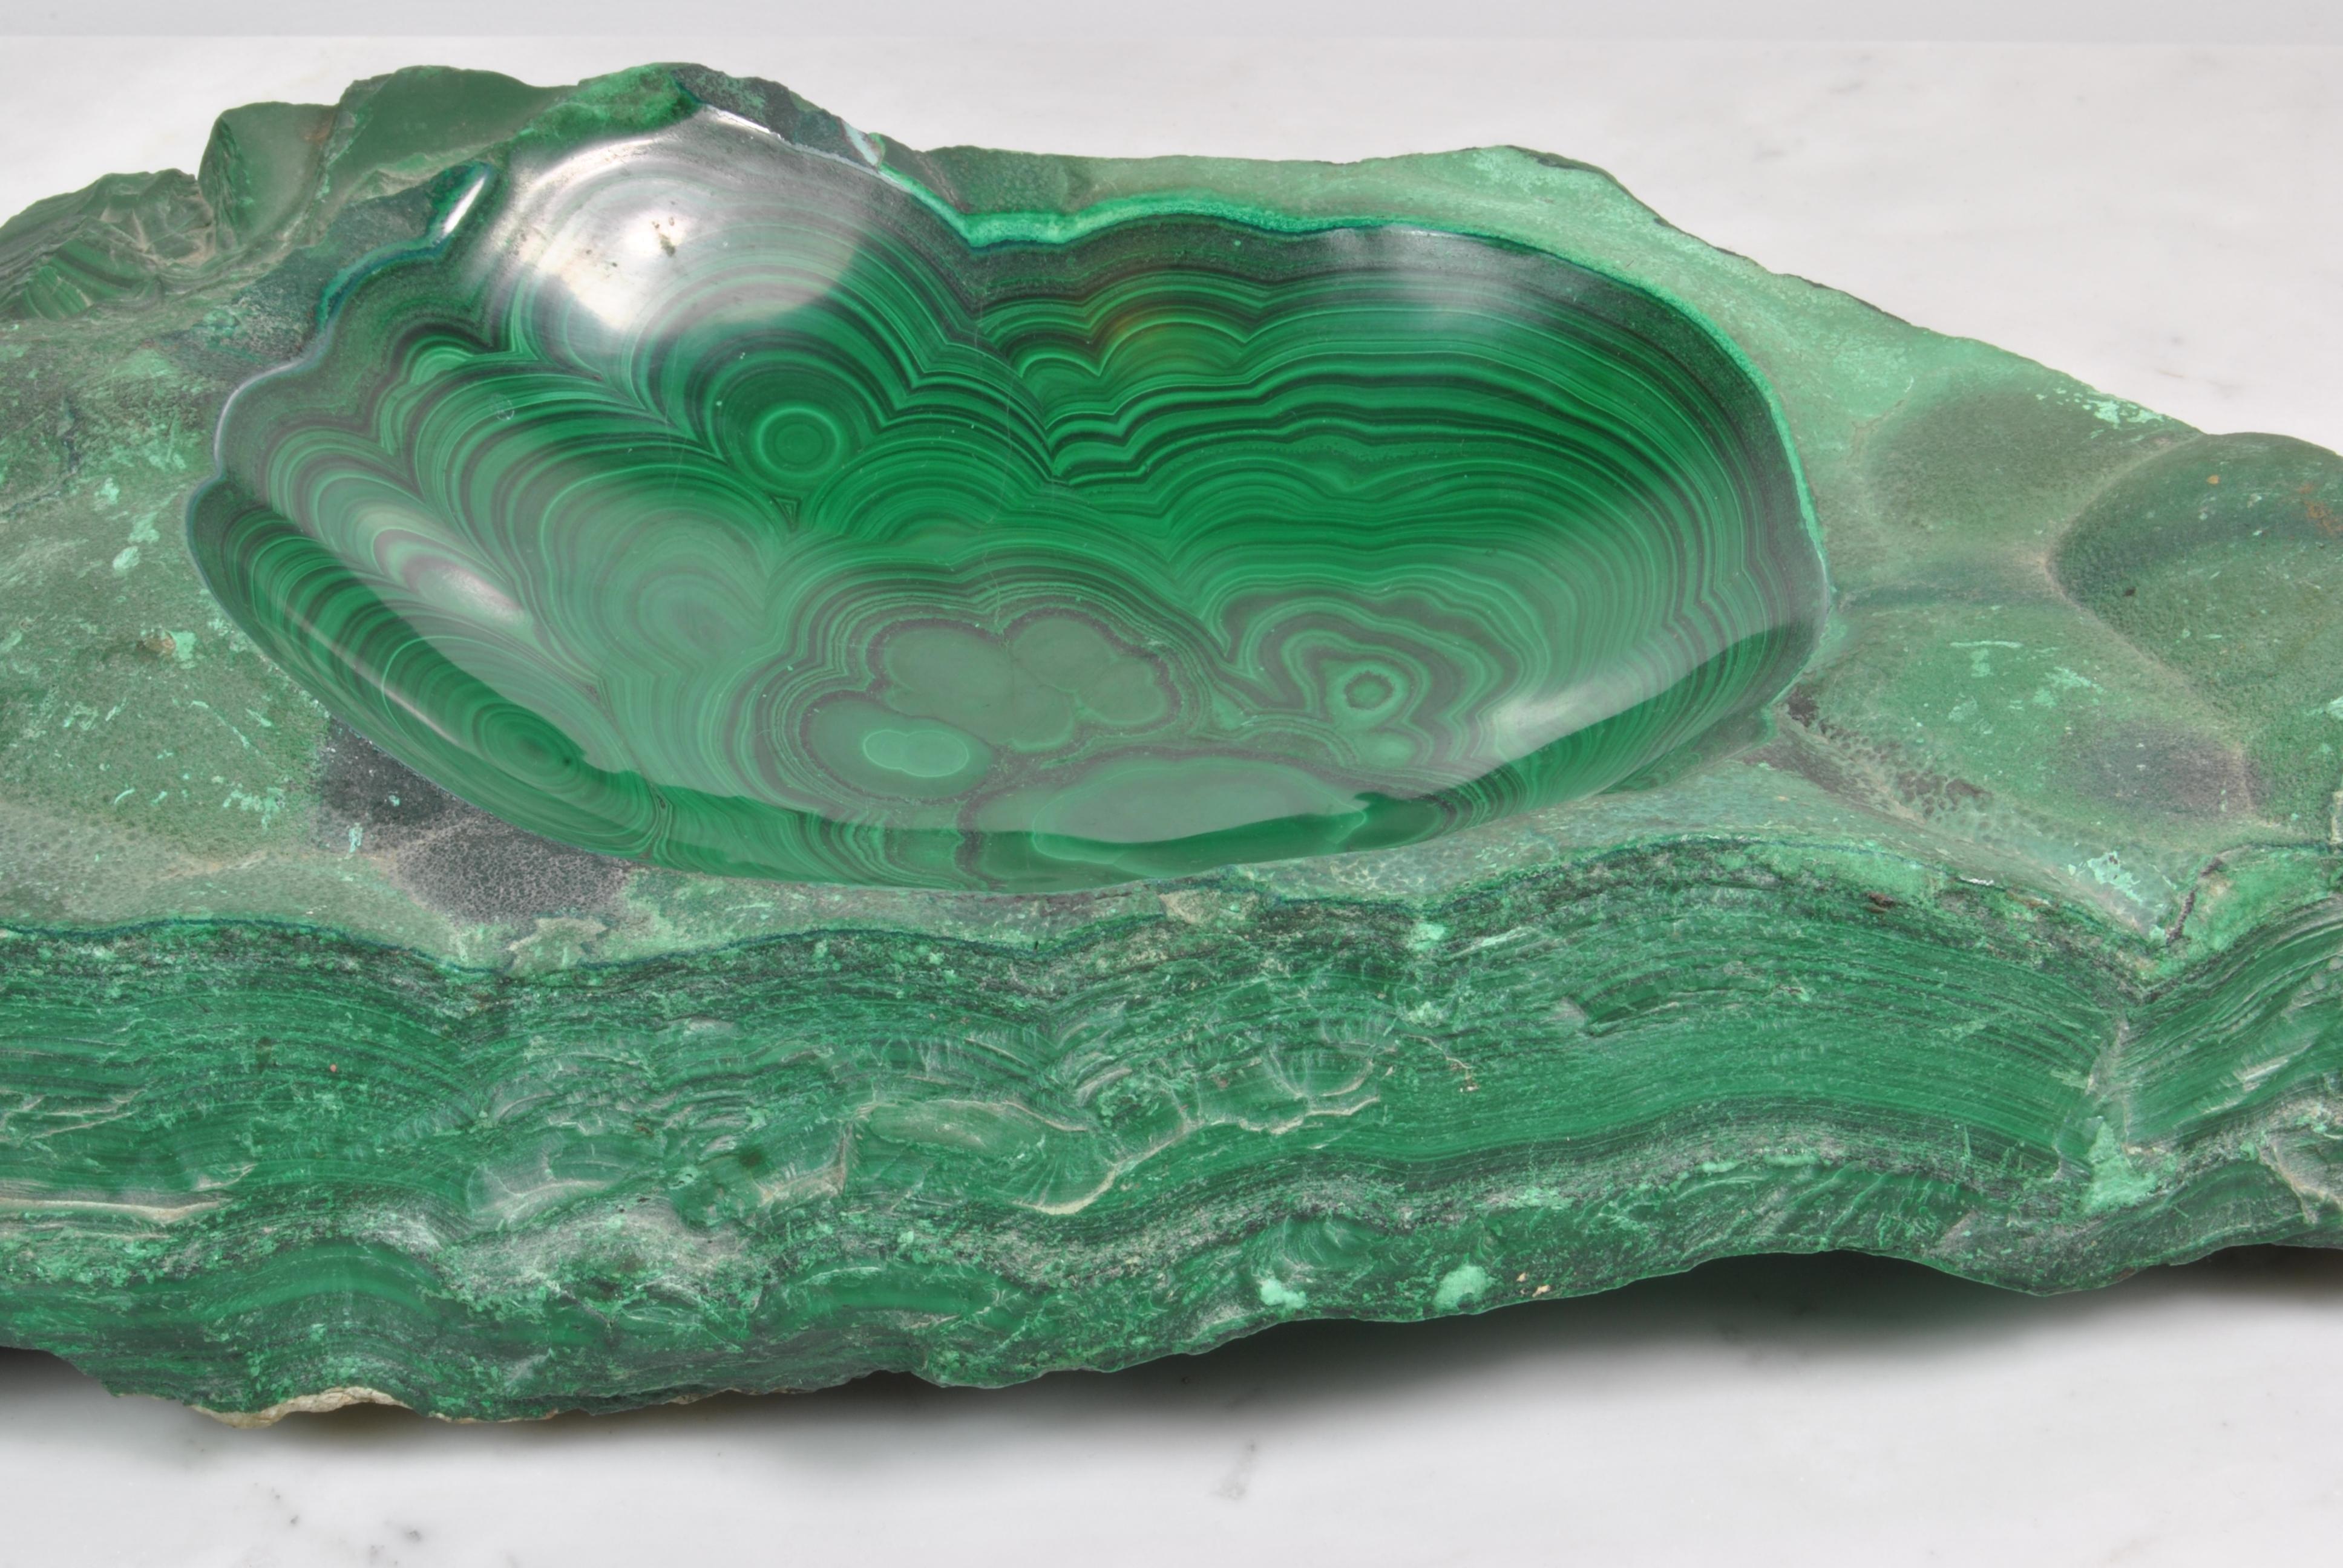 An awesome and decorative bowl of all natural malachite mineral stone, Italy, 1950.